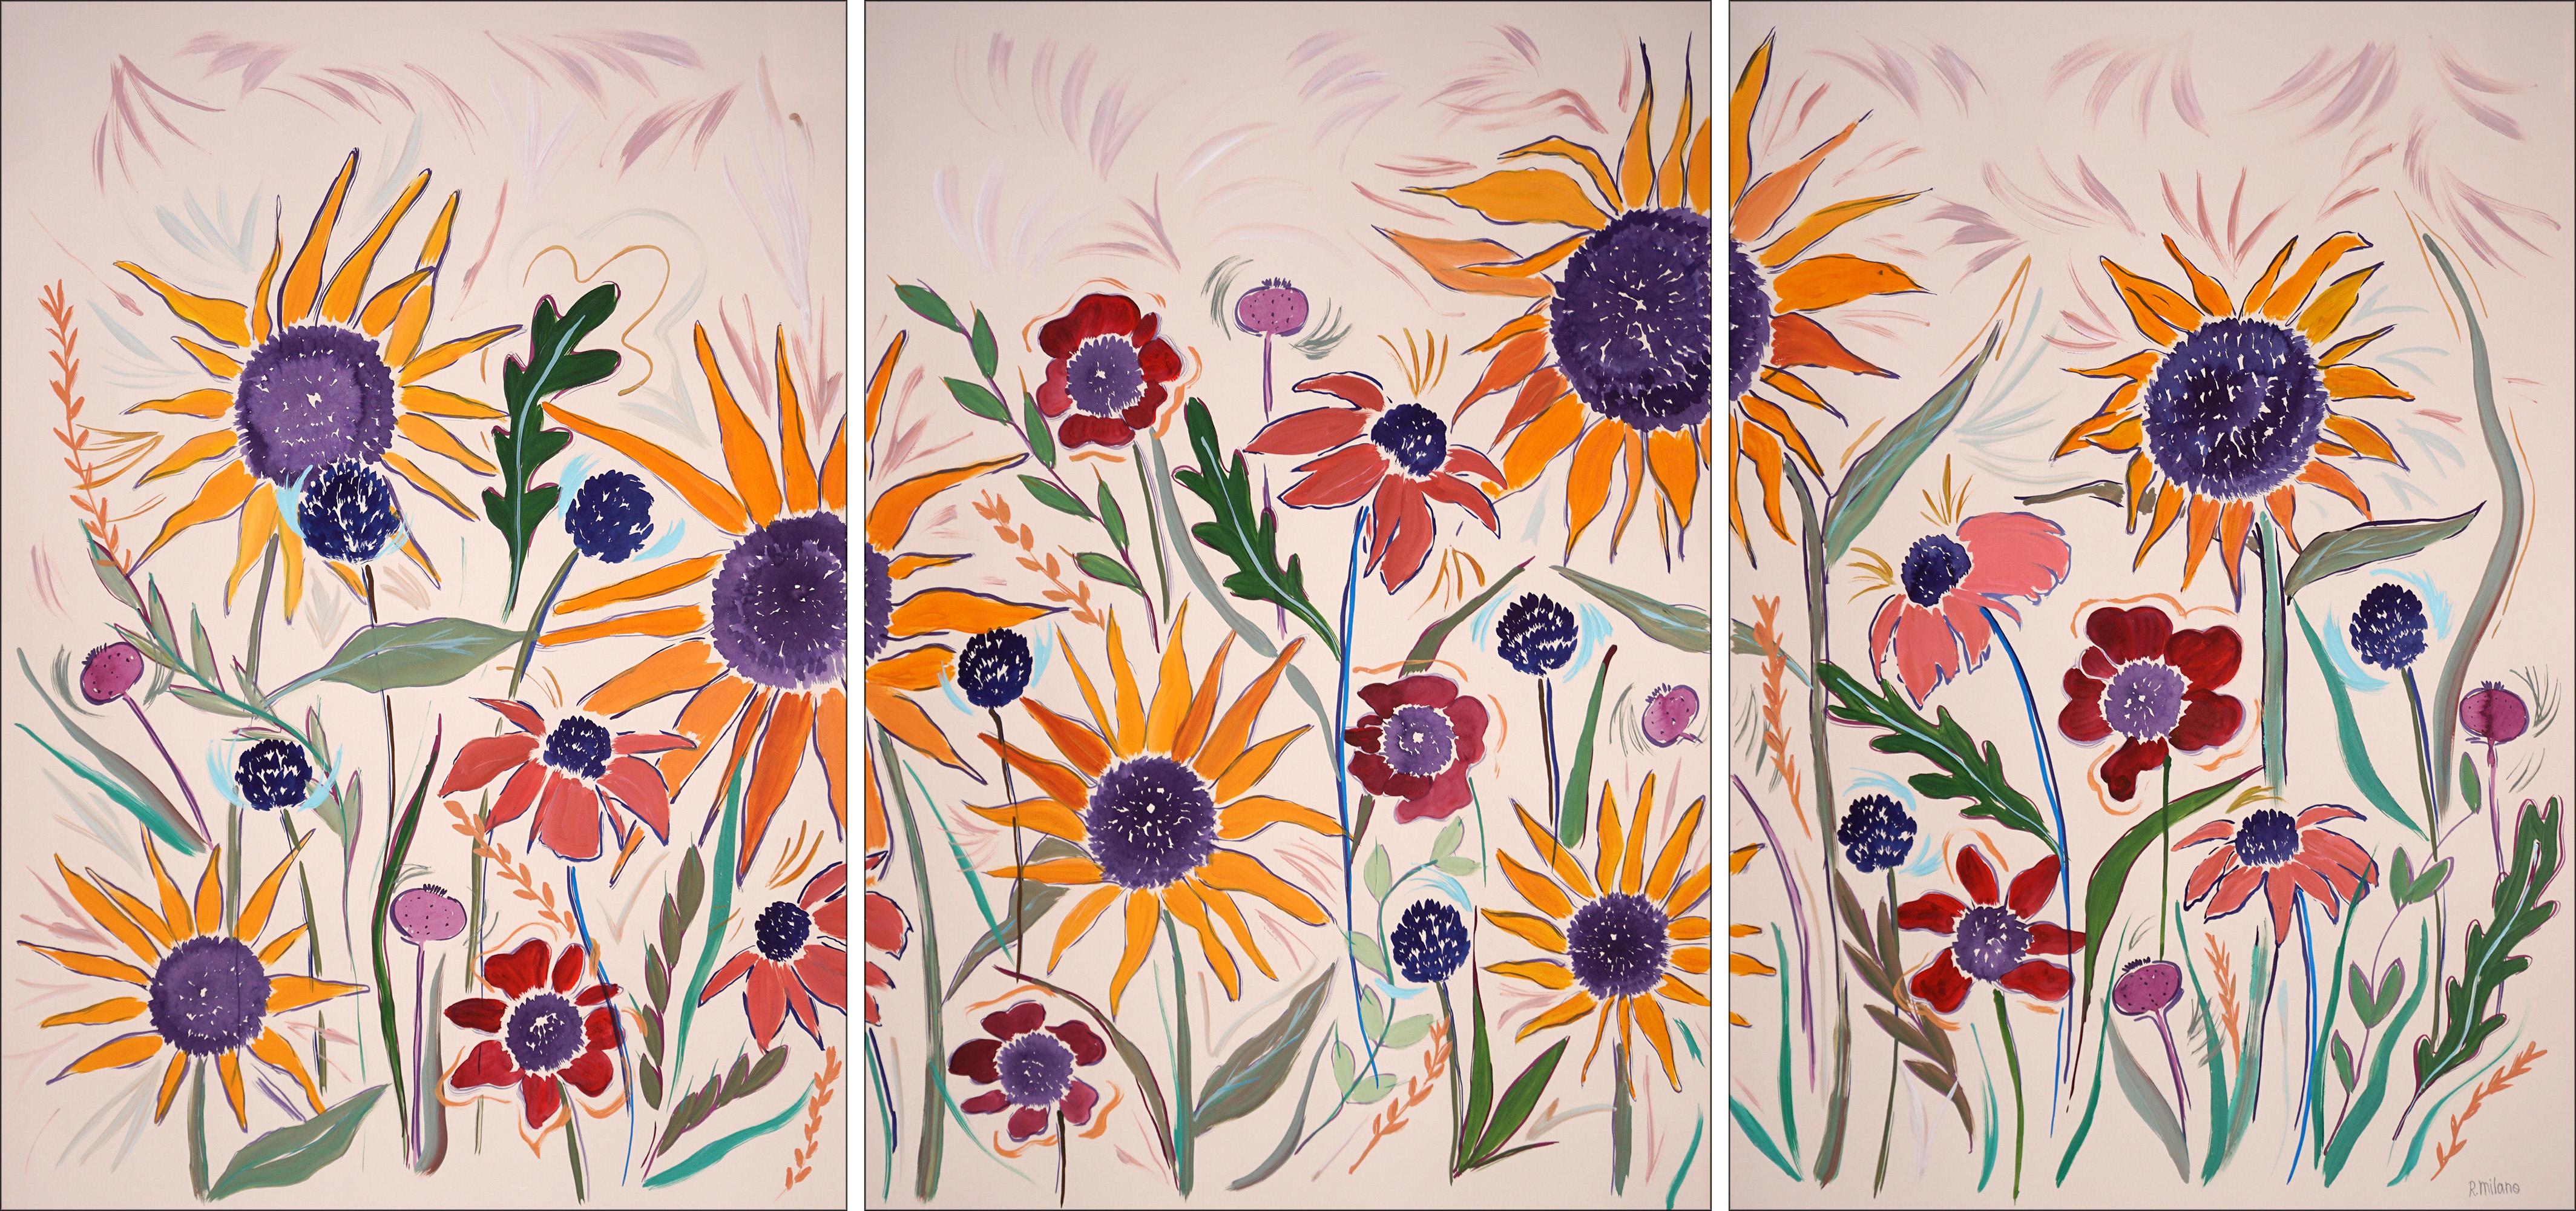 Romina Milano Landscape Painting - Sunflower Panorama Triptych, Large Countryside Flowers, Yellow Wild Margaritas